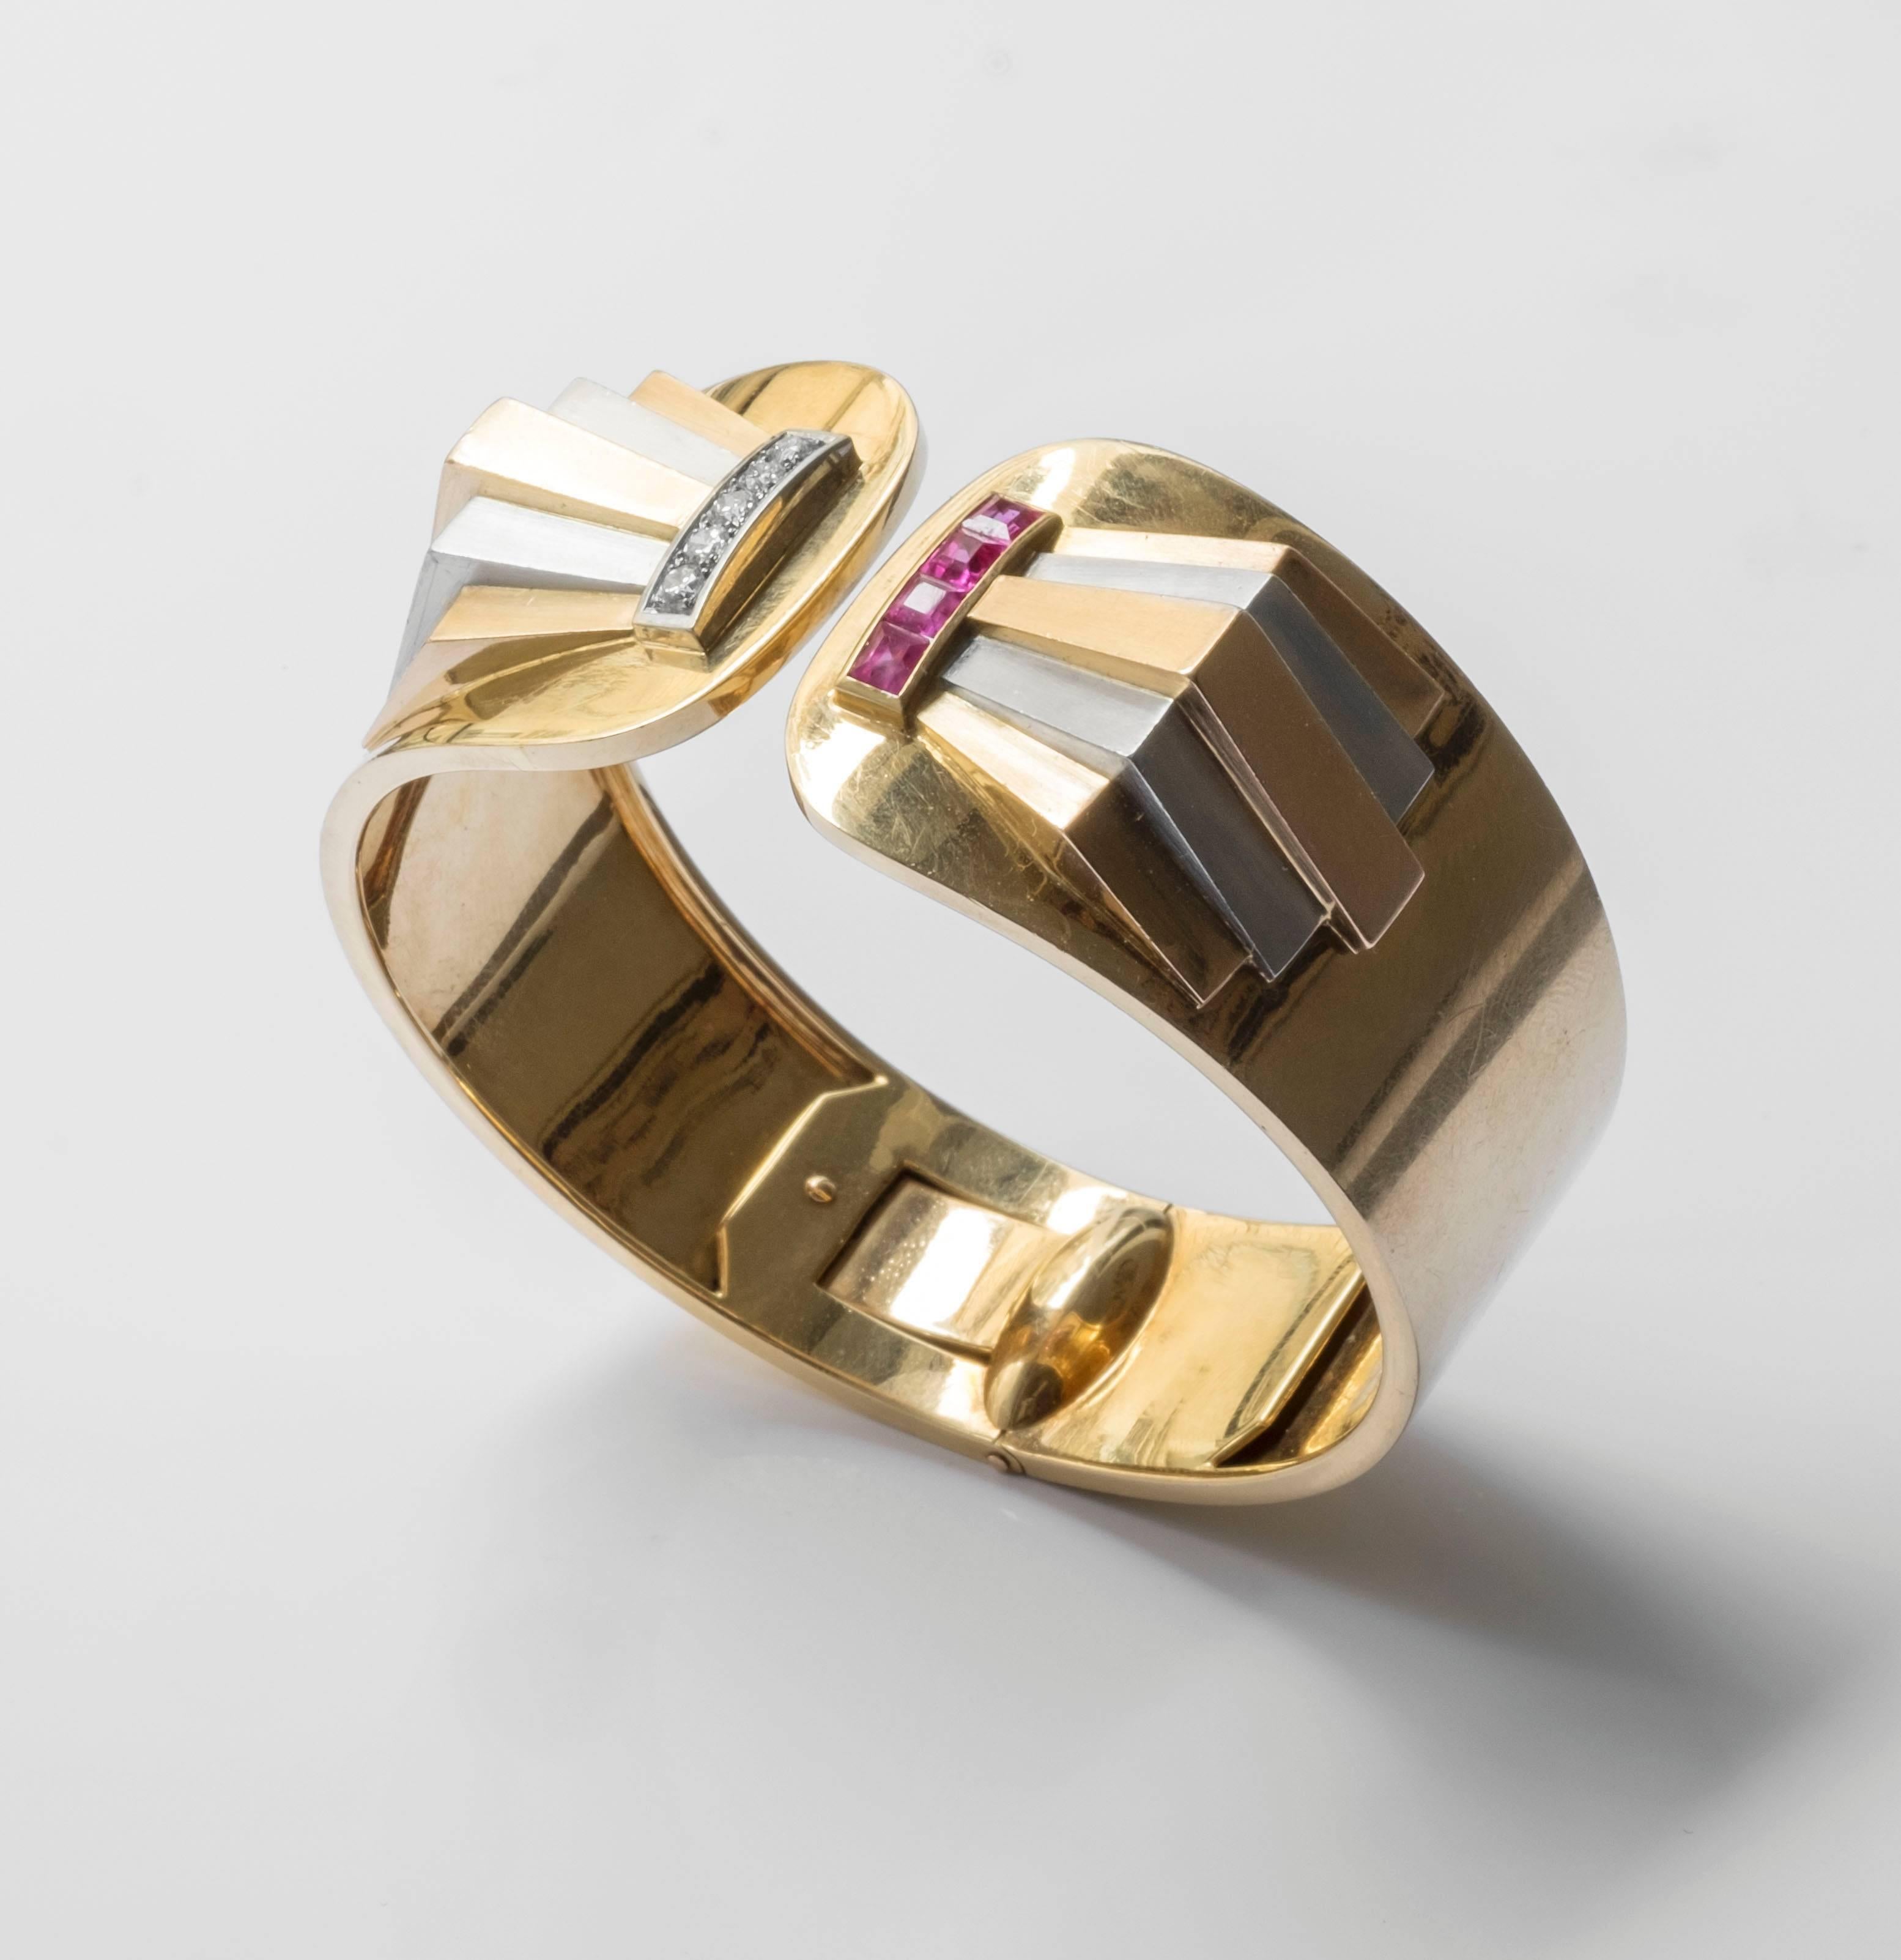 Alluring cuff bracelet embellished with 18k gold, platinum, diamonds and rubies. Geometric reliefs, alternating from platinum and gold, are enclosed on the cuffs opening. In addition, radiant rubies are set in grains one side of the opening and